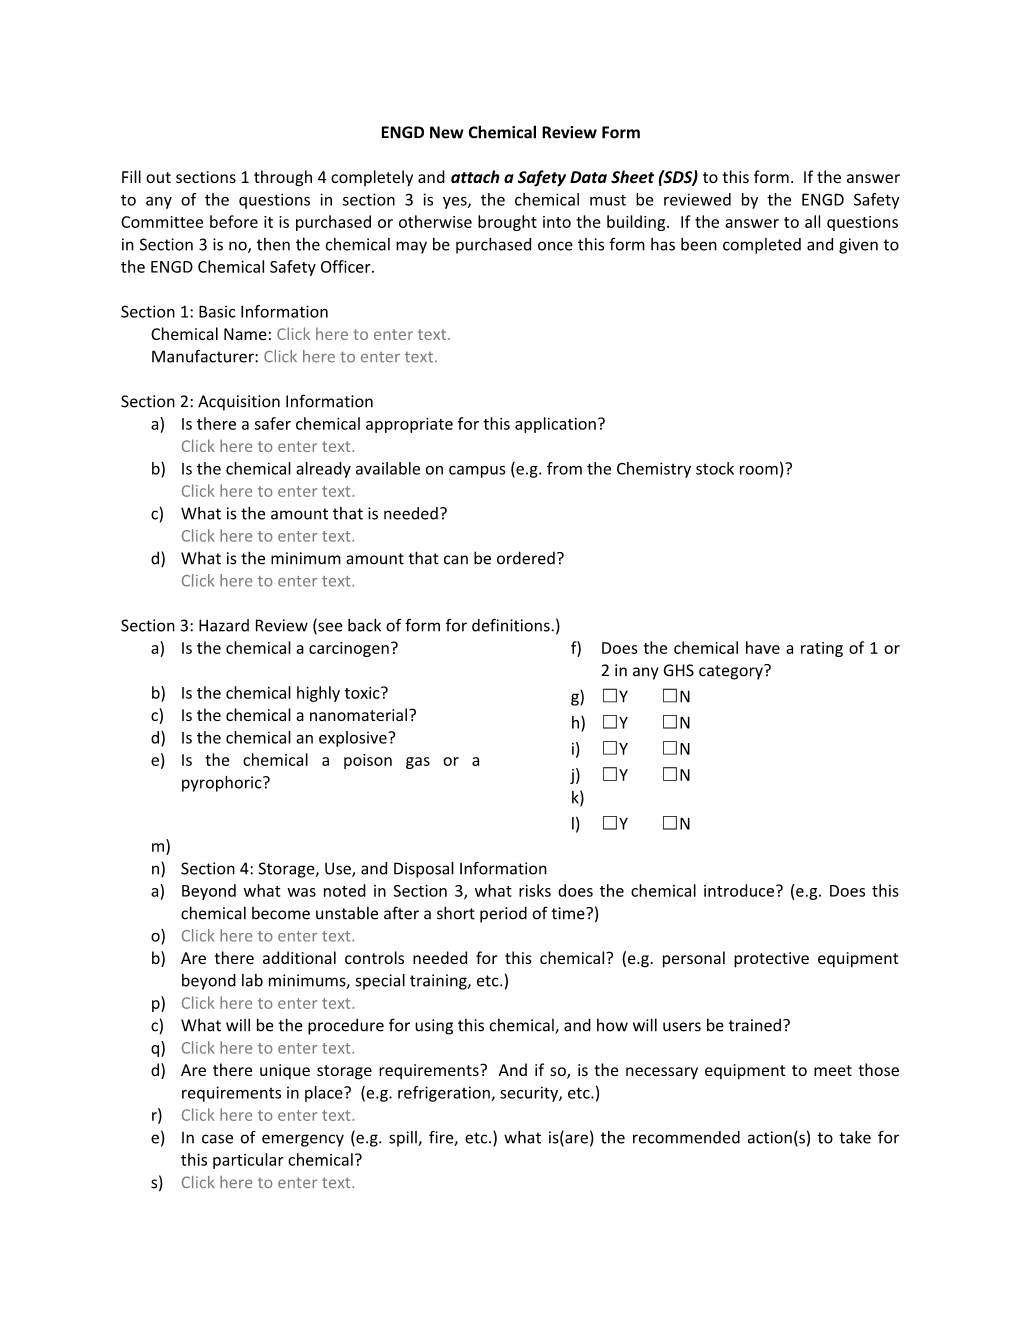 ENGD New Chemical Review Form